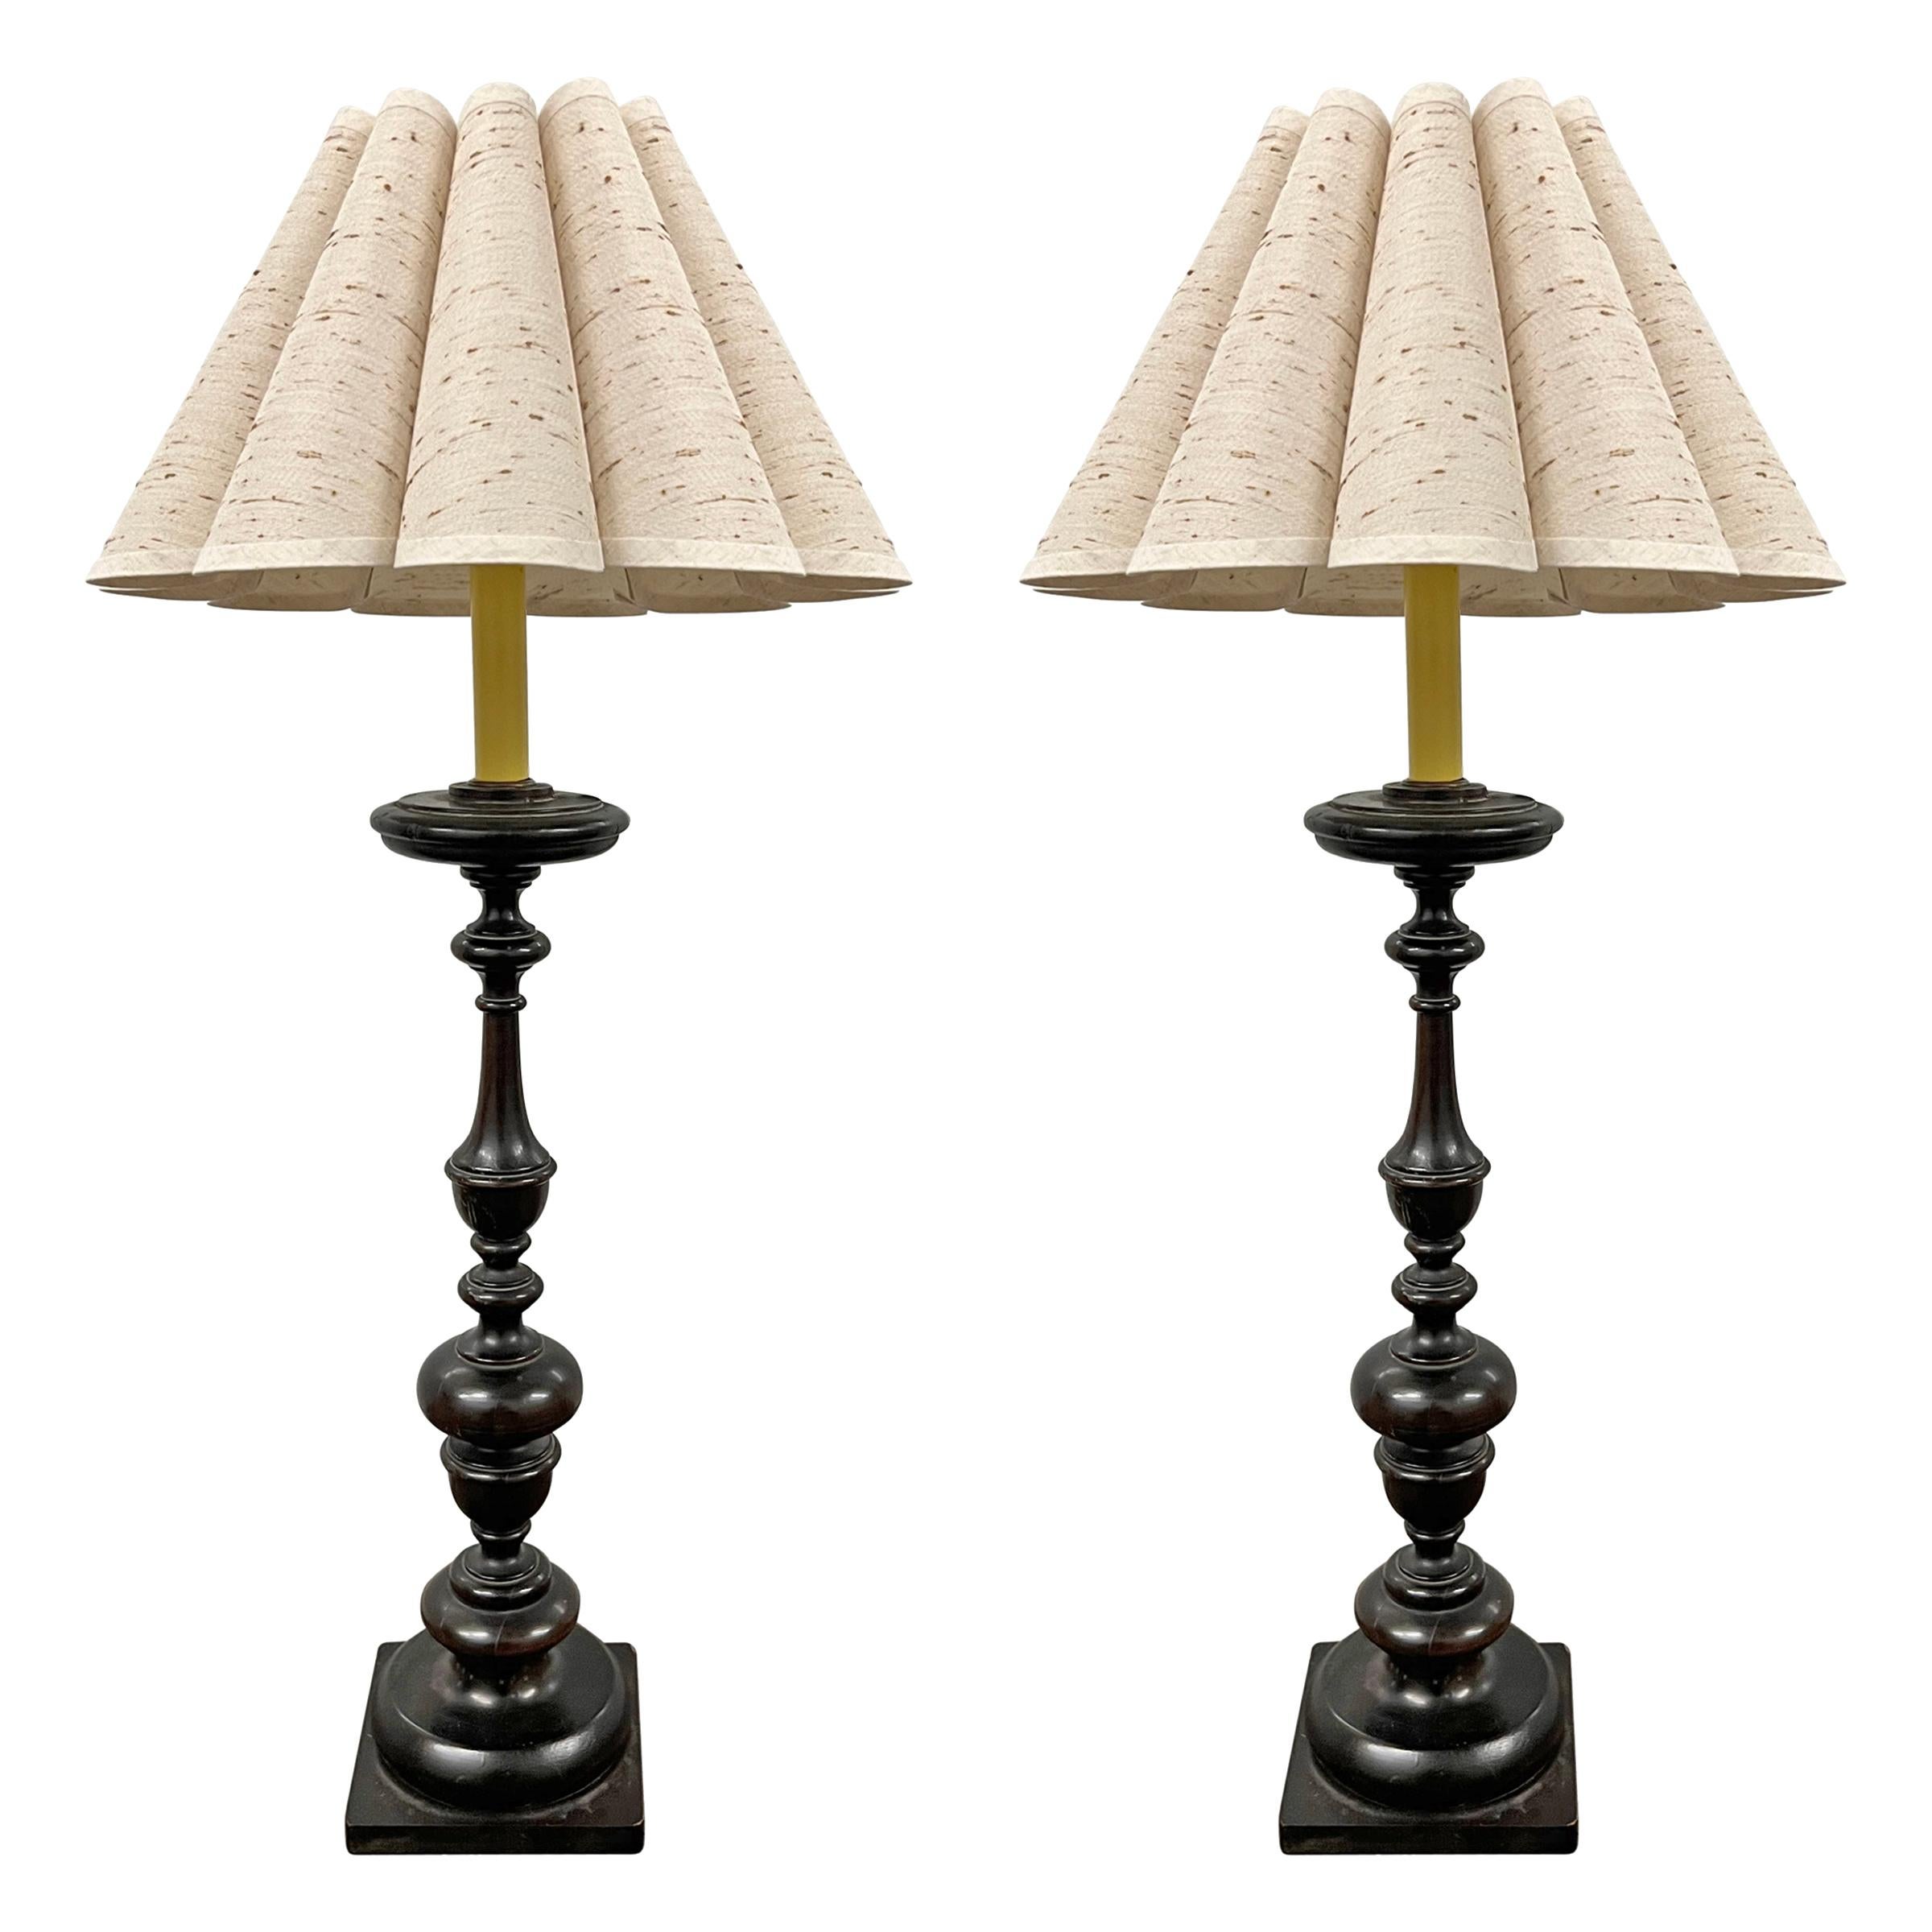 Pair of Early 20th Century Candlestick Lamps with Scalloped Linen Shades